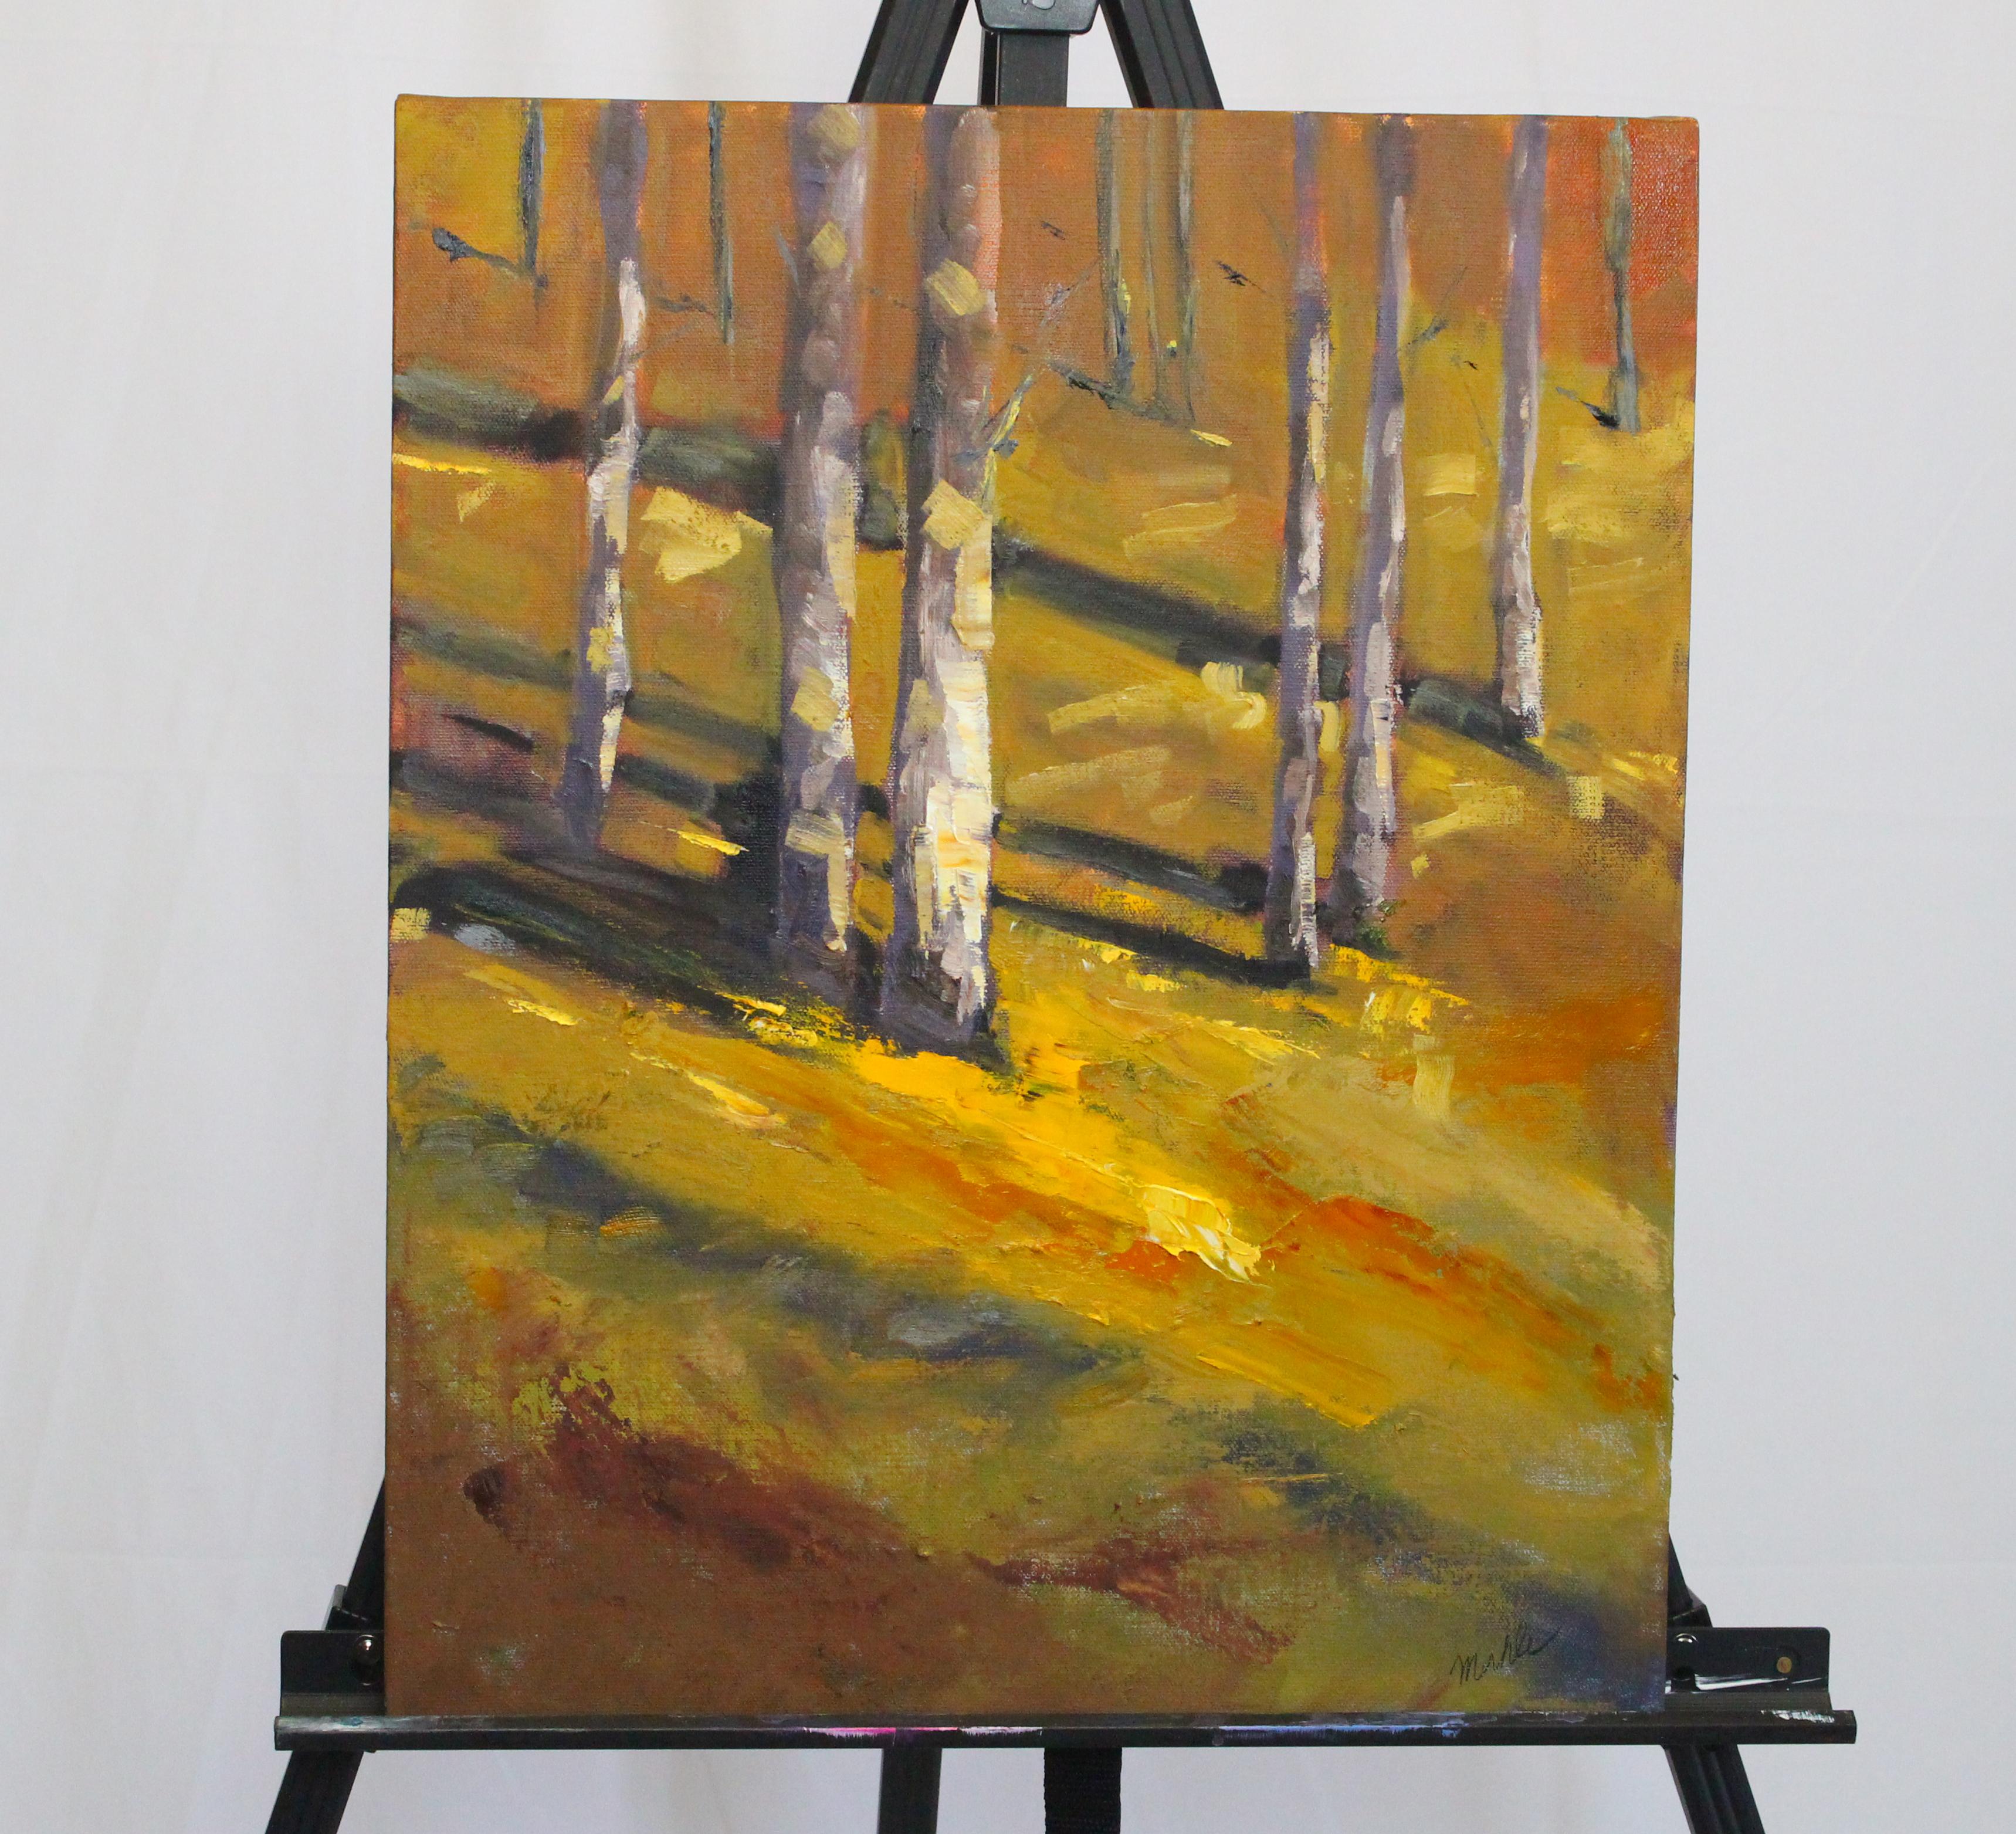 <p>Artist Comments<br>Afternoon shadows stretch across the forest floor, casting deep greens against the golden yellow, orange and umber autumn landscape. Part of Nancy's signature series of nature scenes. She spends a lot of time exploring the